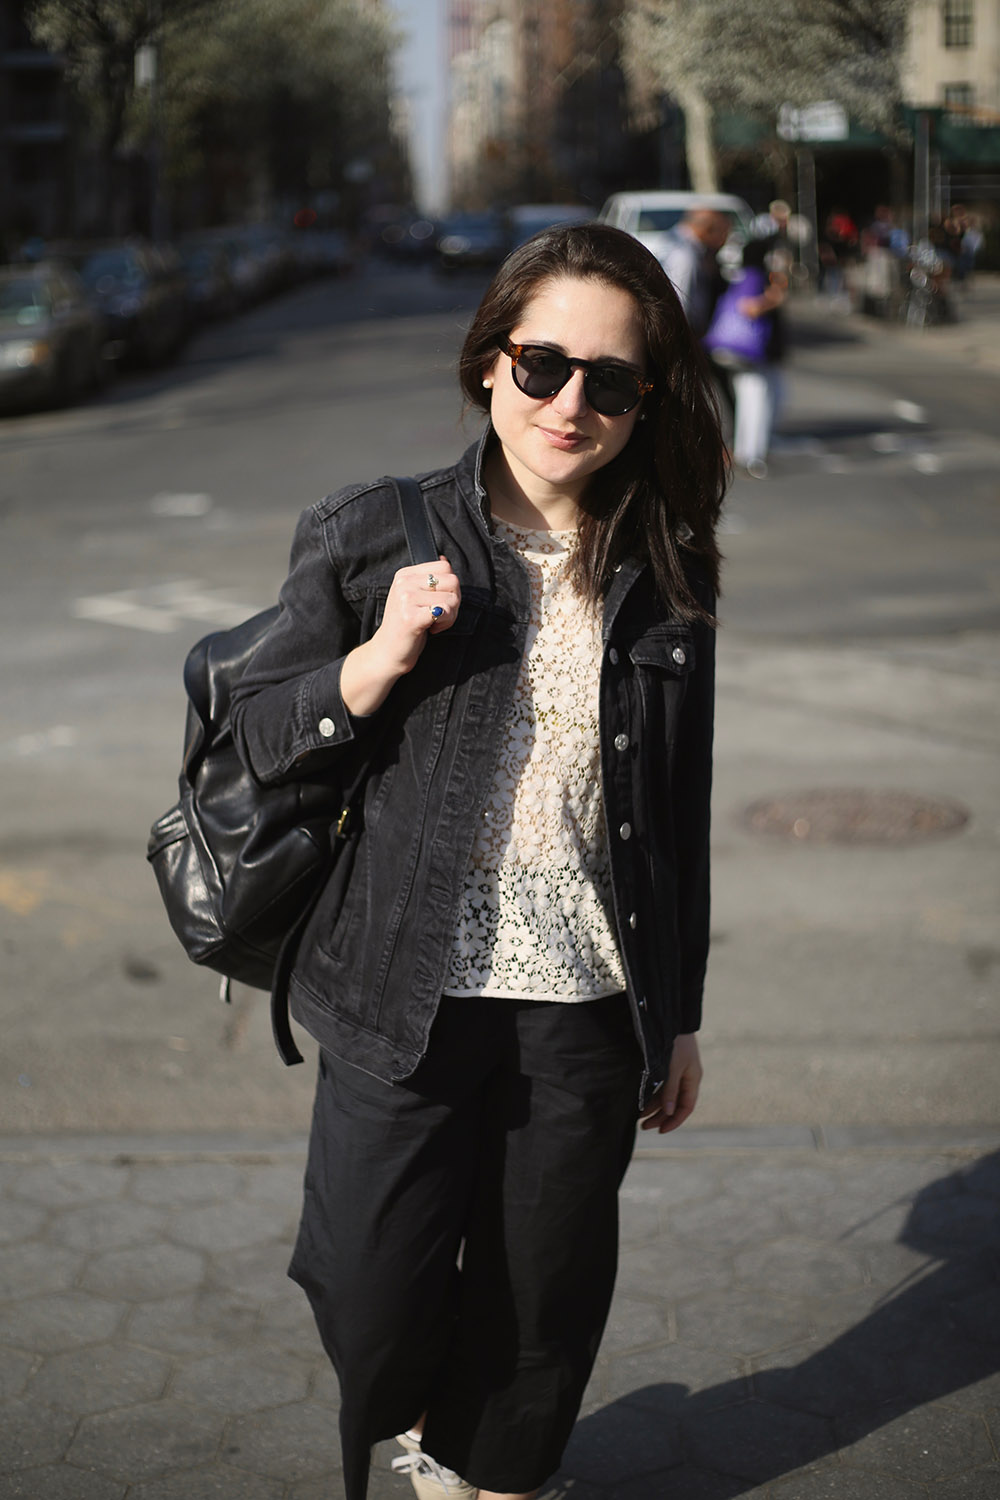 Street Style: Springtime in NYC — 5th Floor Walk-Up